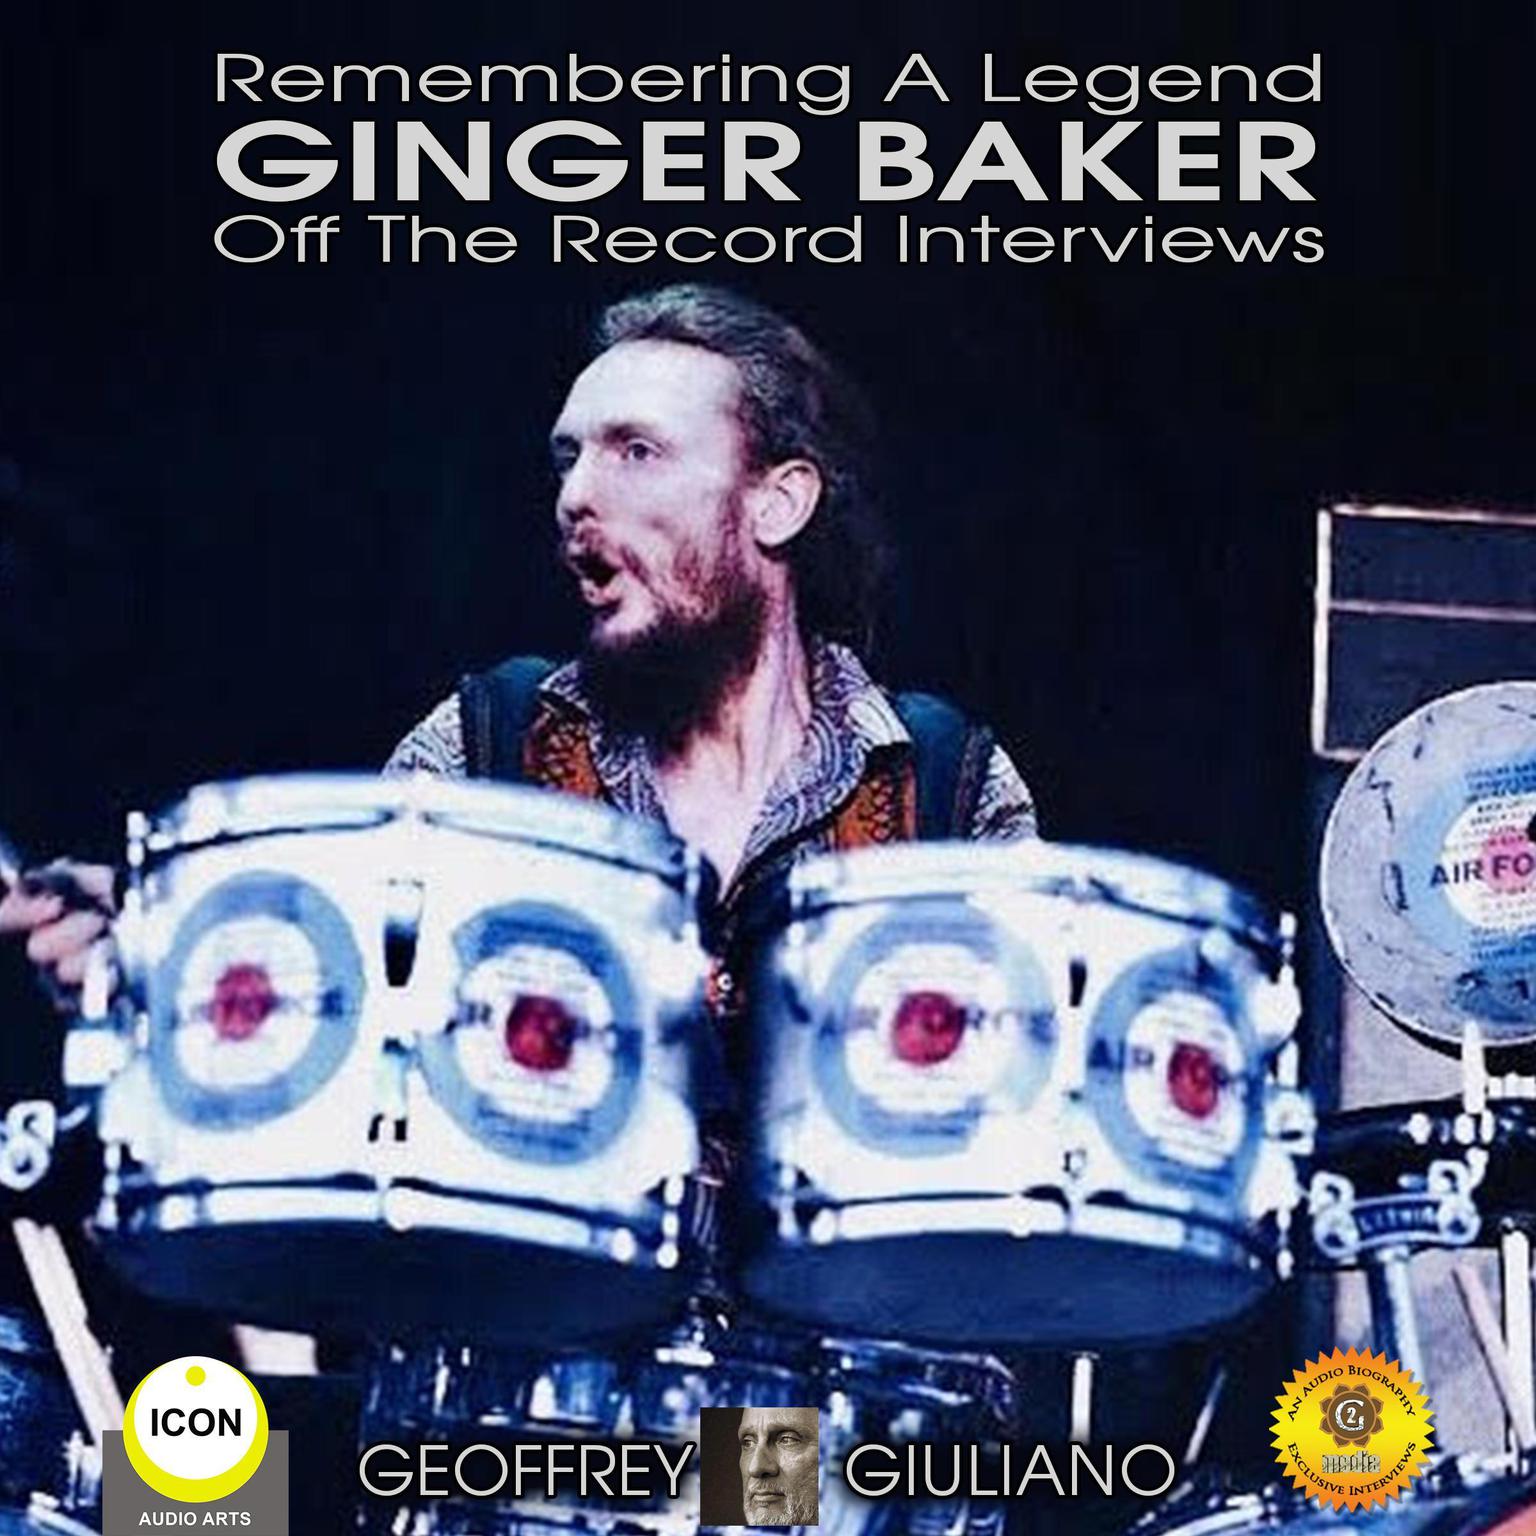 Remembering The Legend Ginger Baker Off The Record Interviews Audiobook, by Geoffrey Giuliano